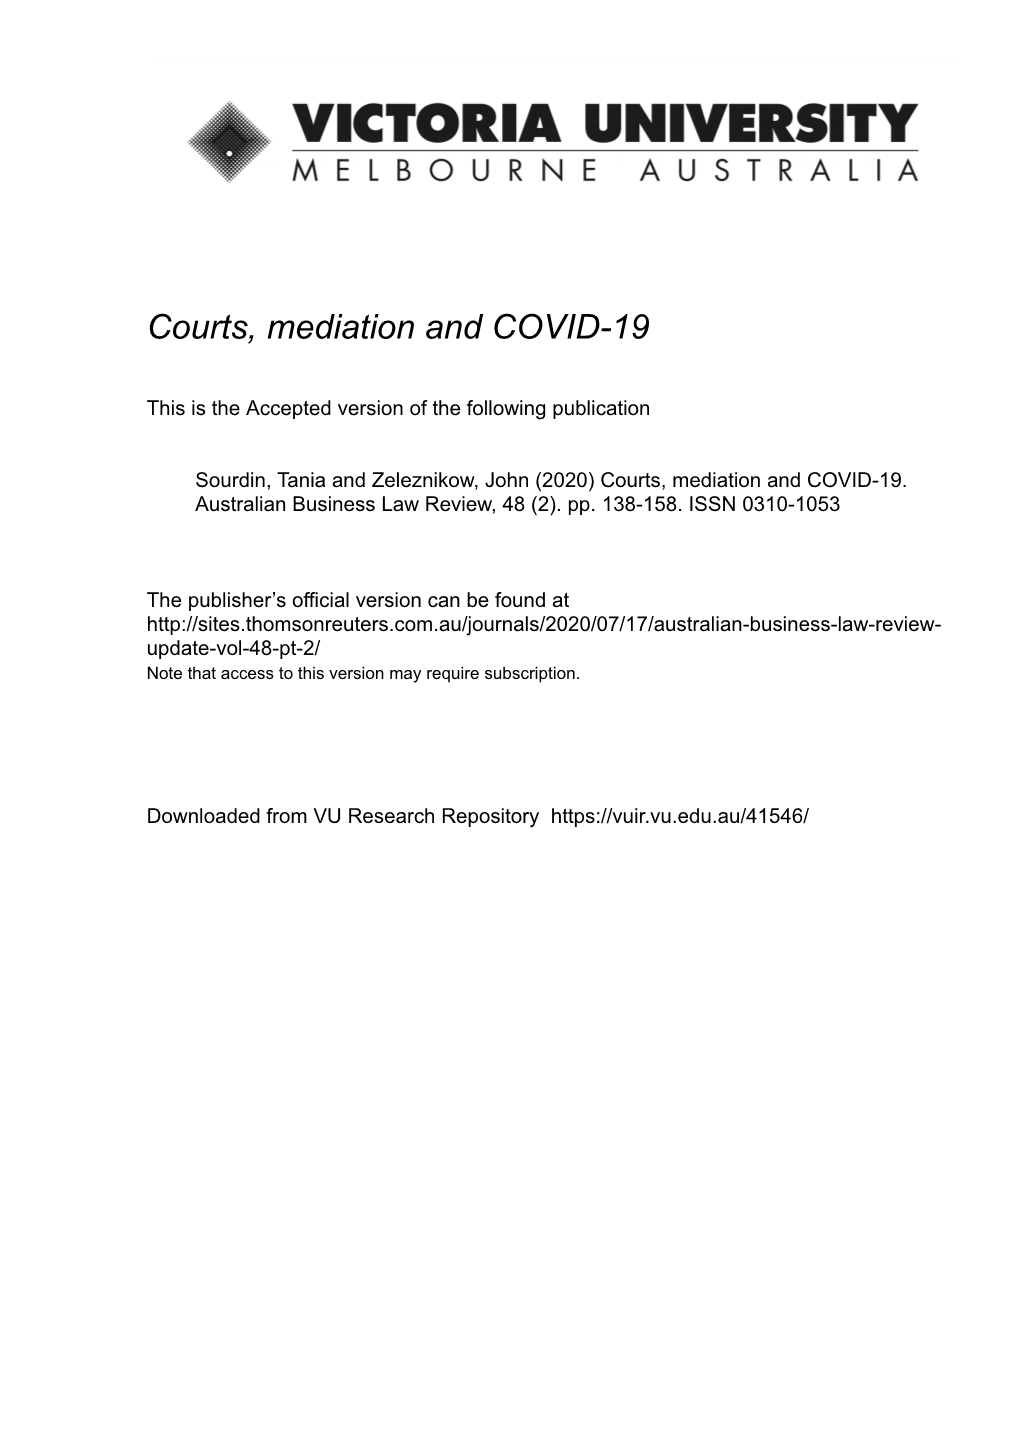 Courts, Mediation and COVID-19